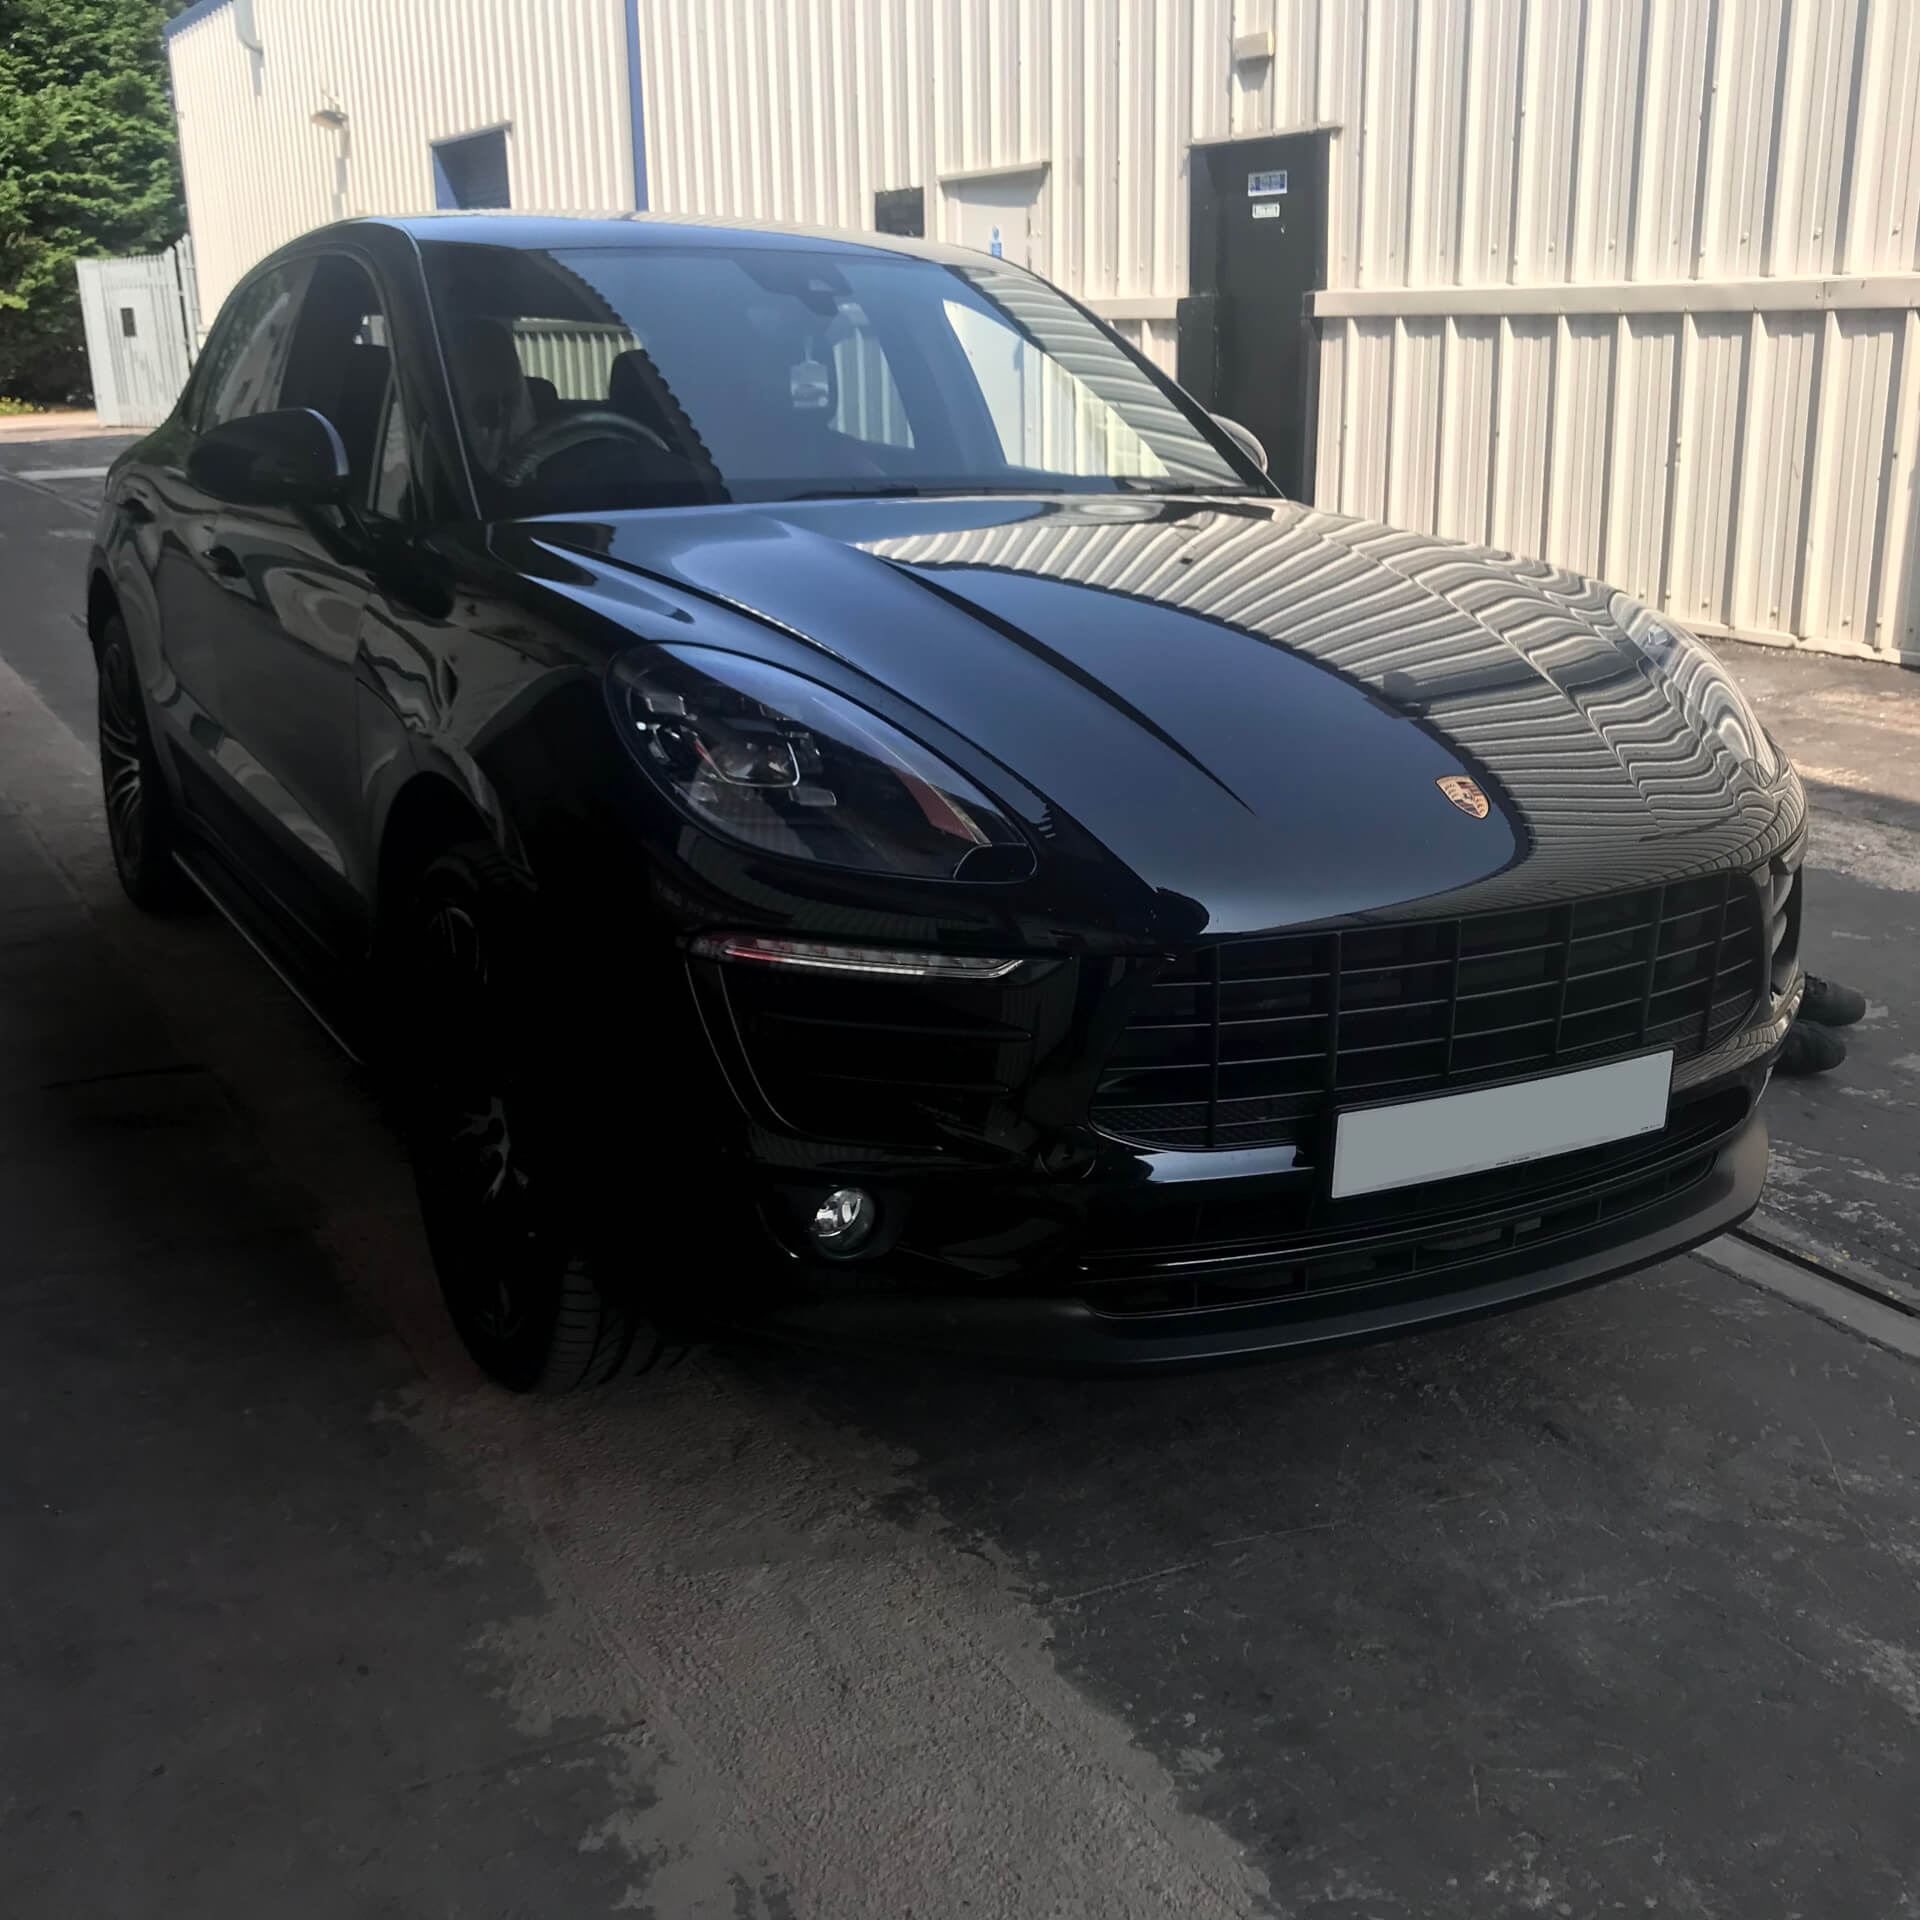 Direct4x4 accessories for Porsche Macan vehicles with a photo of a black Porsche Macan parked outside our offices